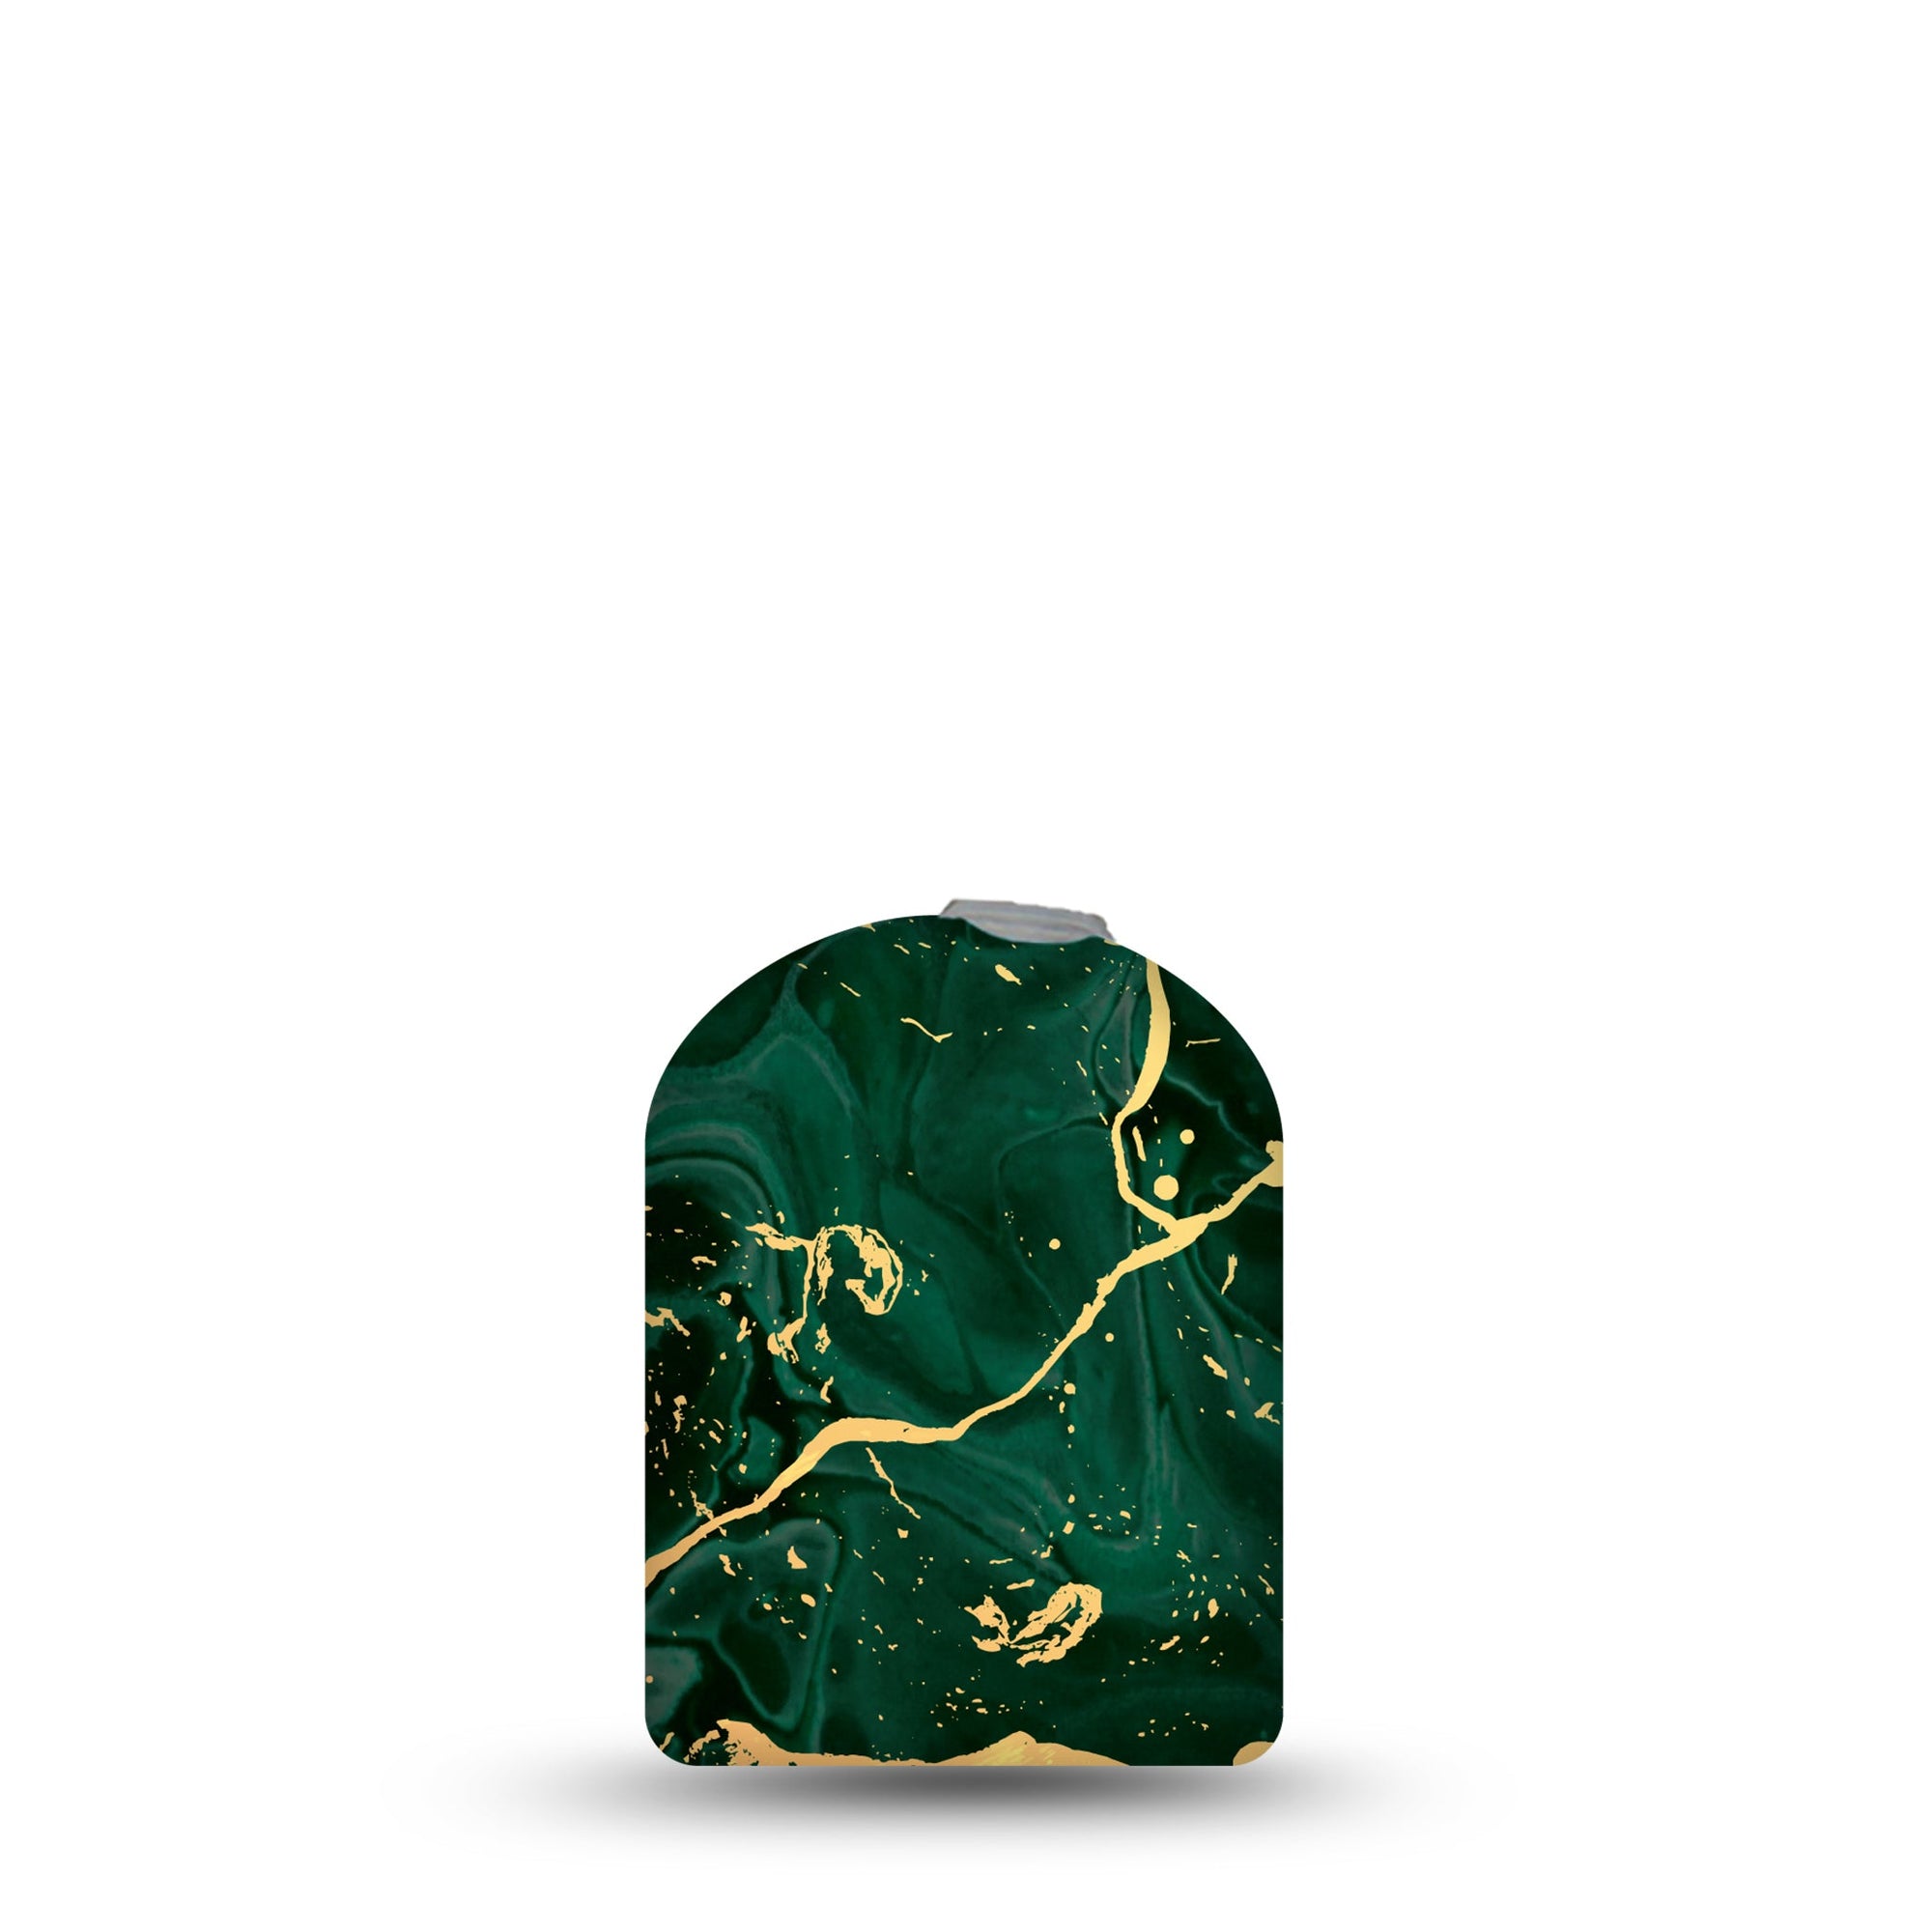 ExpressionMed Green & Gold Marble Pod Sticker Natural Stained Stone, Omnipod Vinyl Sticker Design